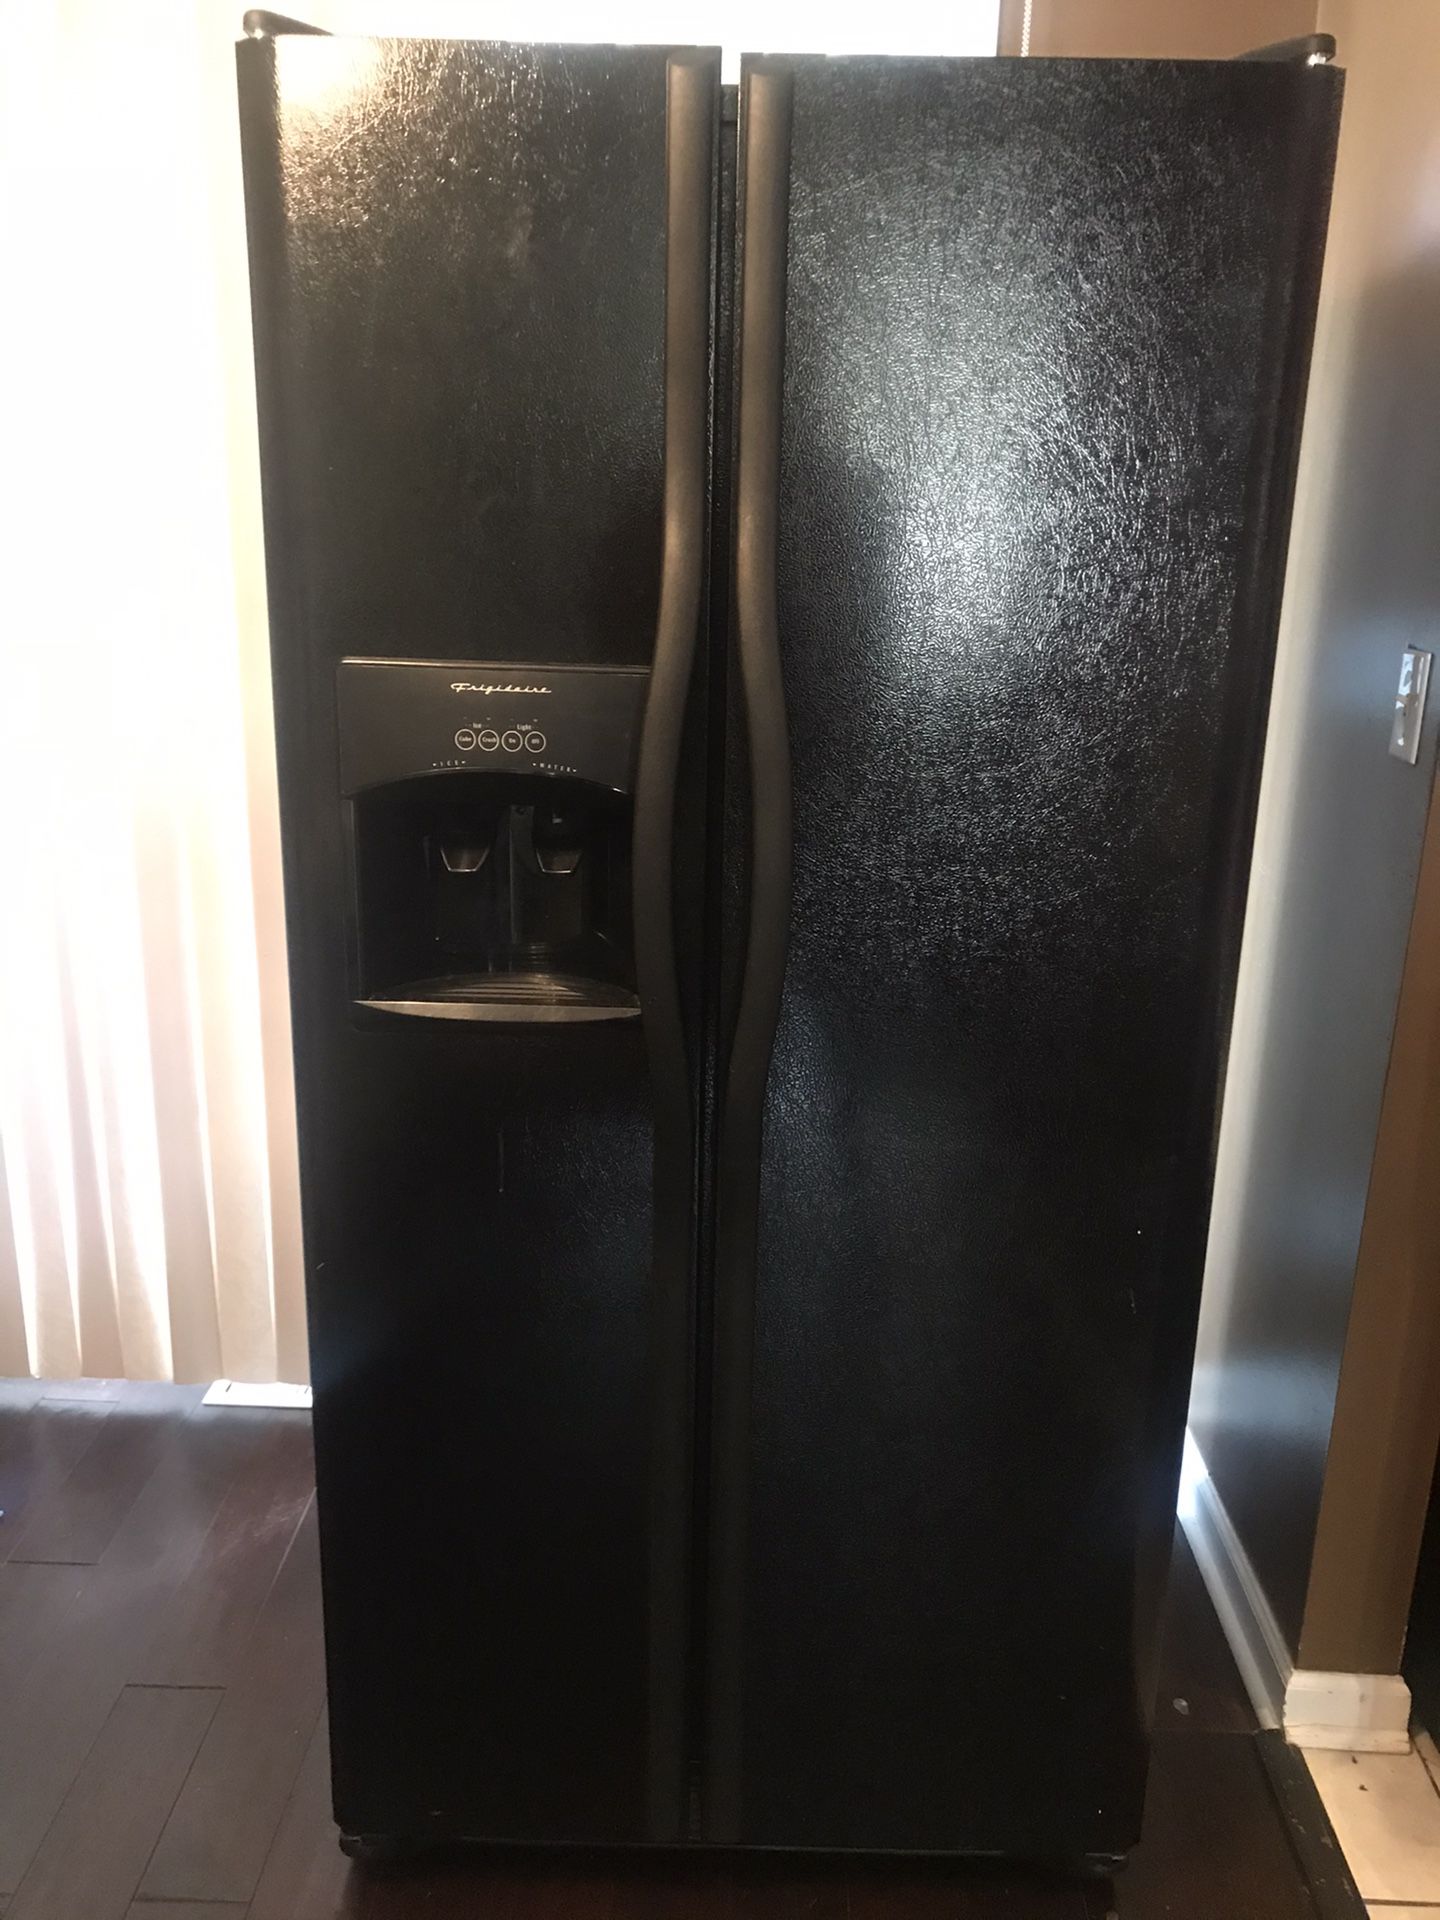 Nice refrigerator for sale for parts.